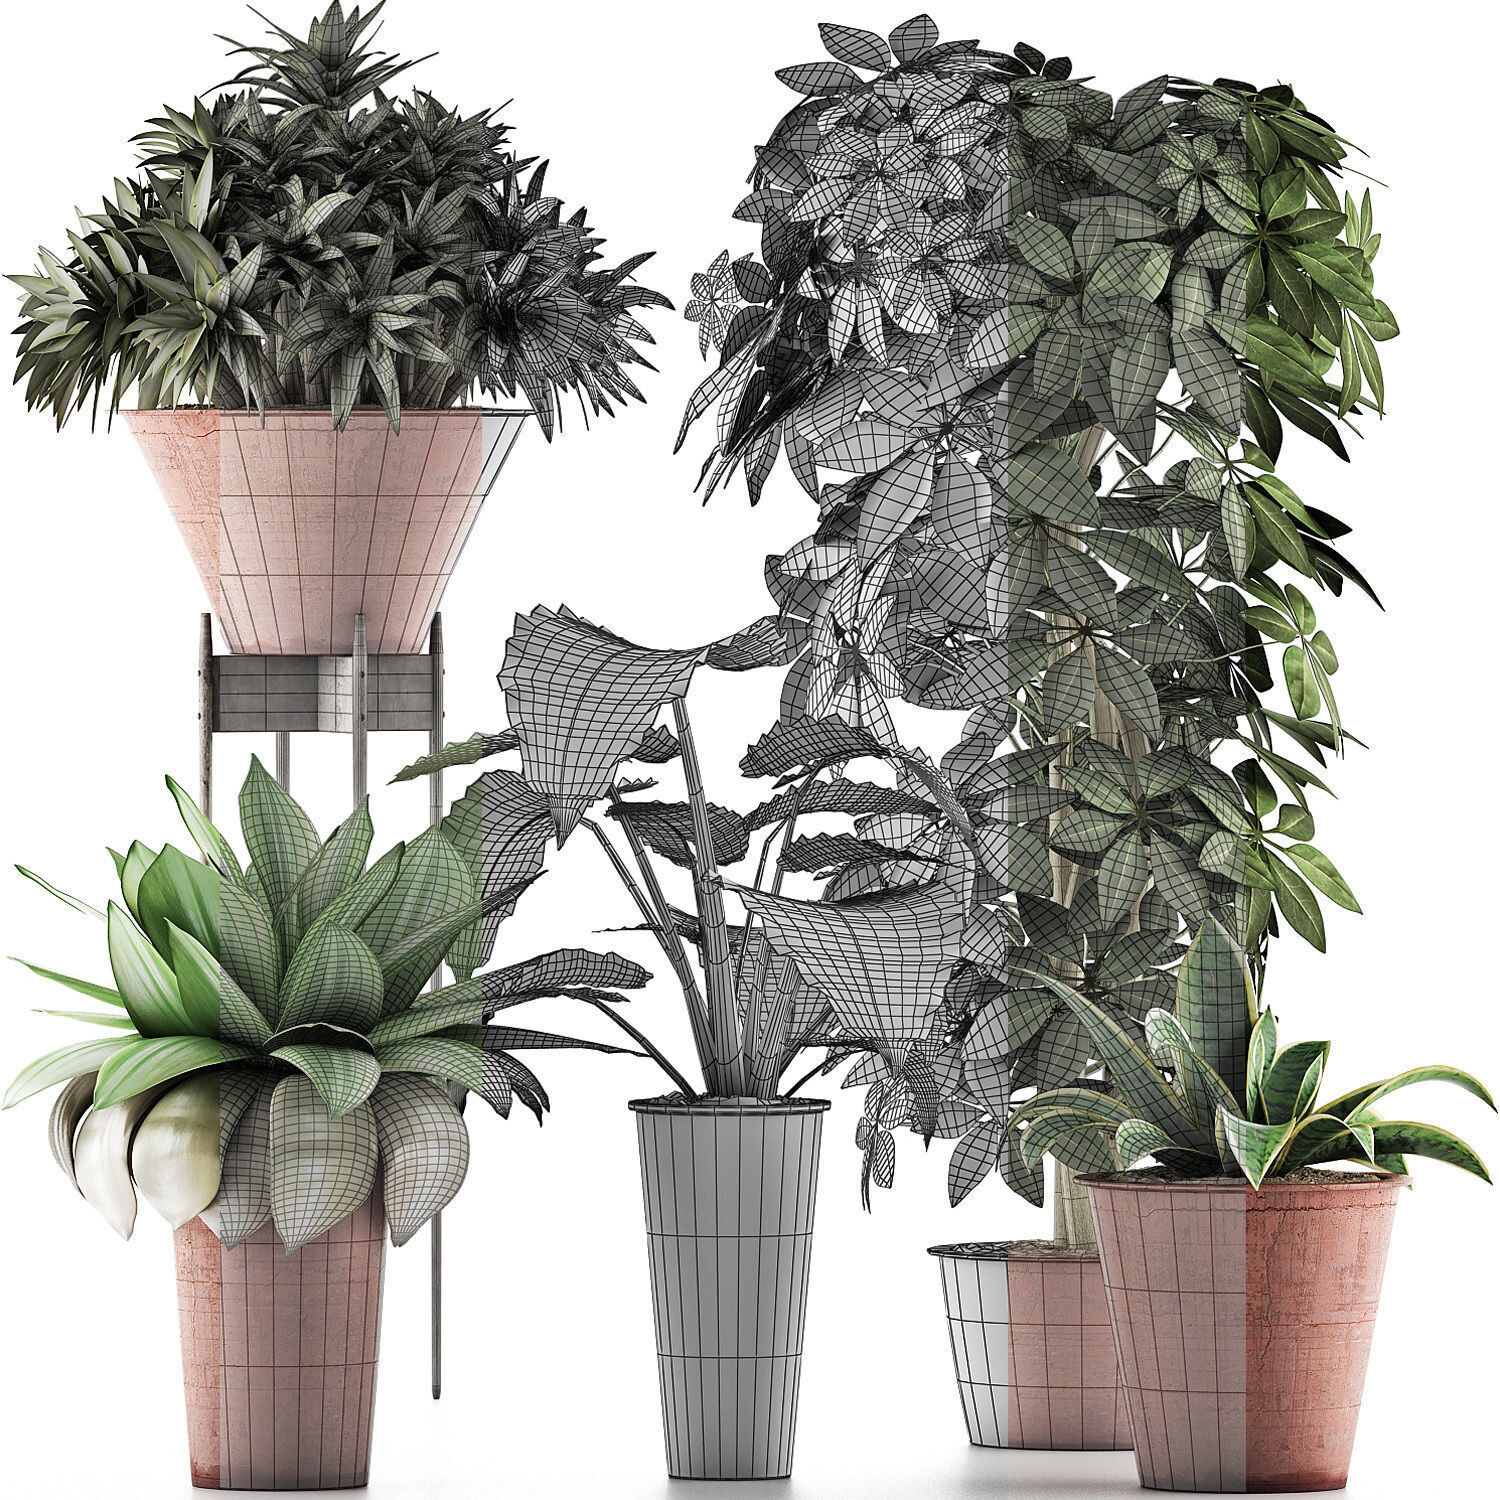 Plants photos for 3d Max. Collection 35